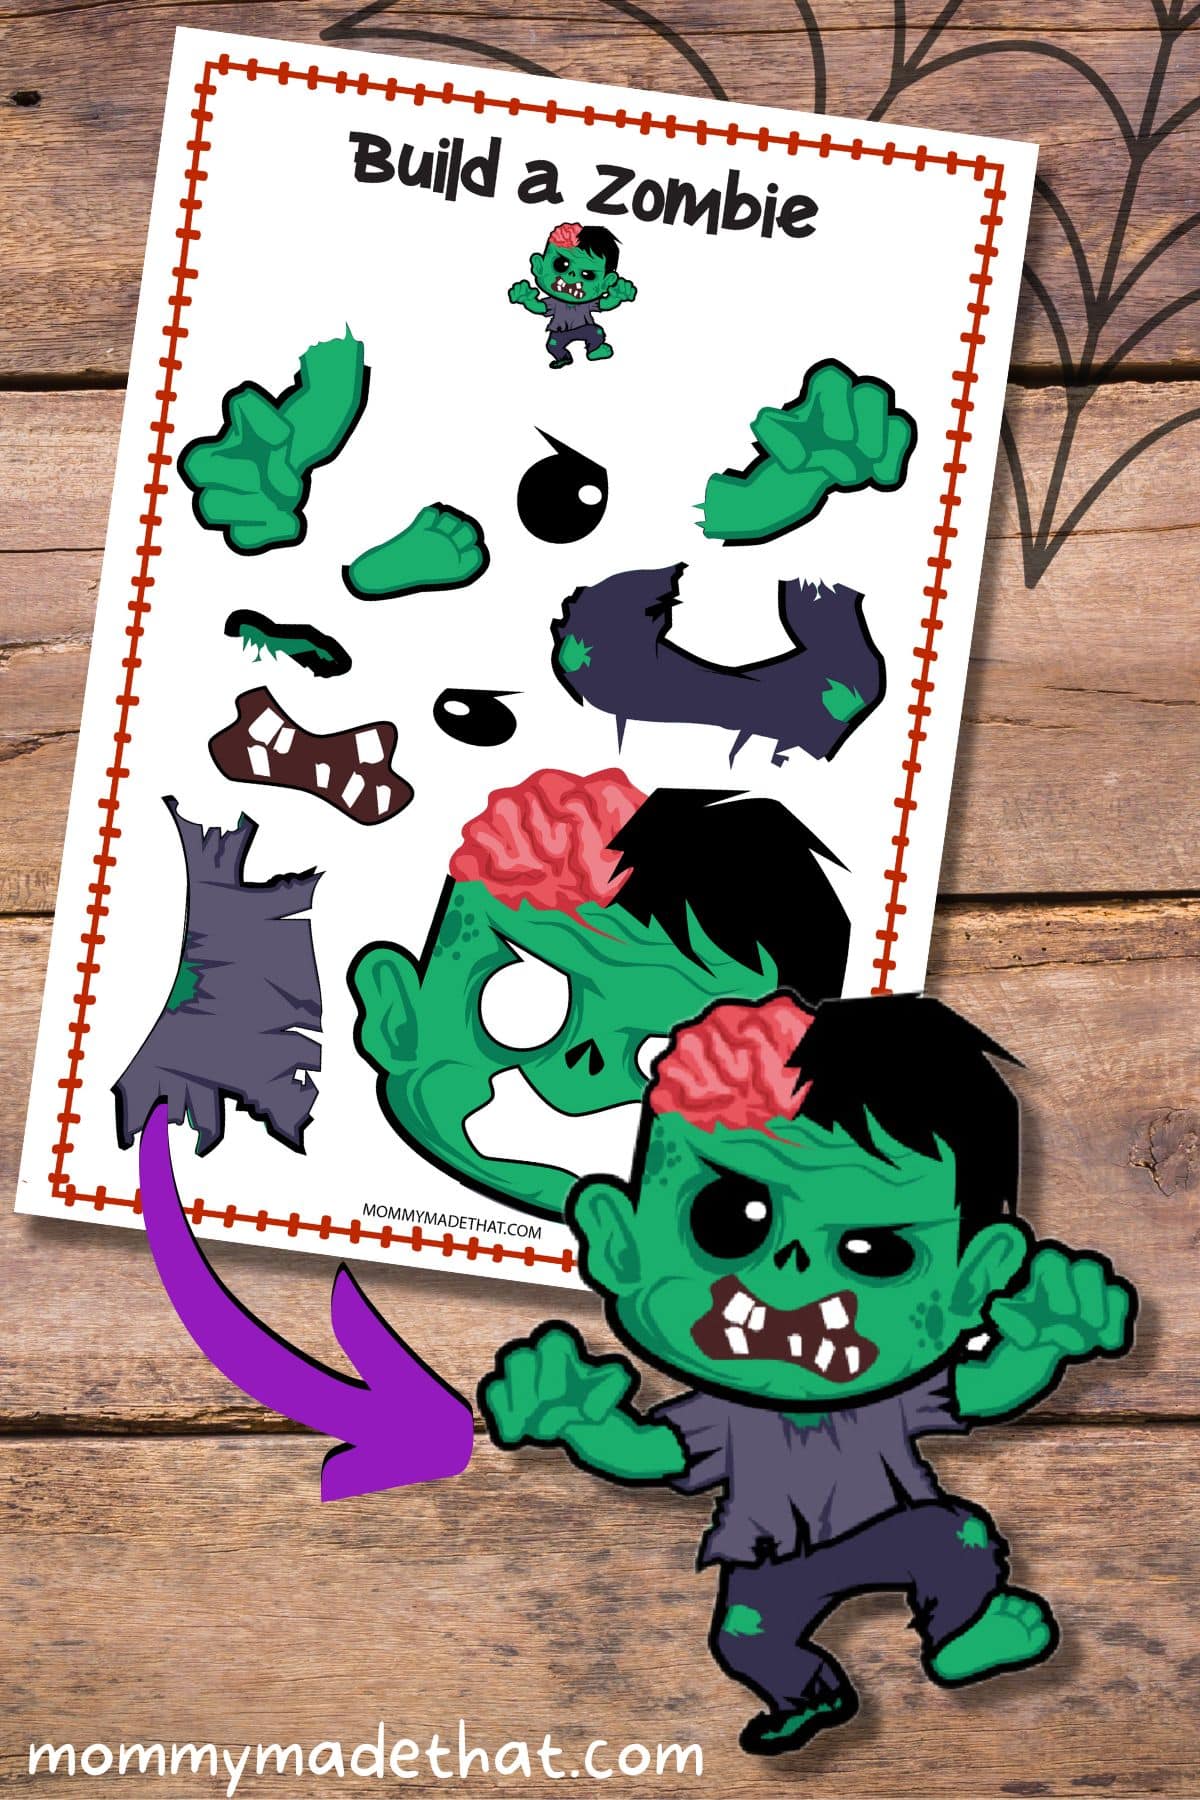 Printable Zombie Craft: Build a Zombie Template